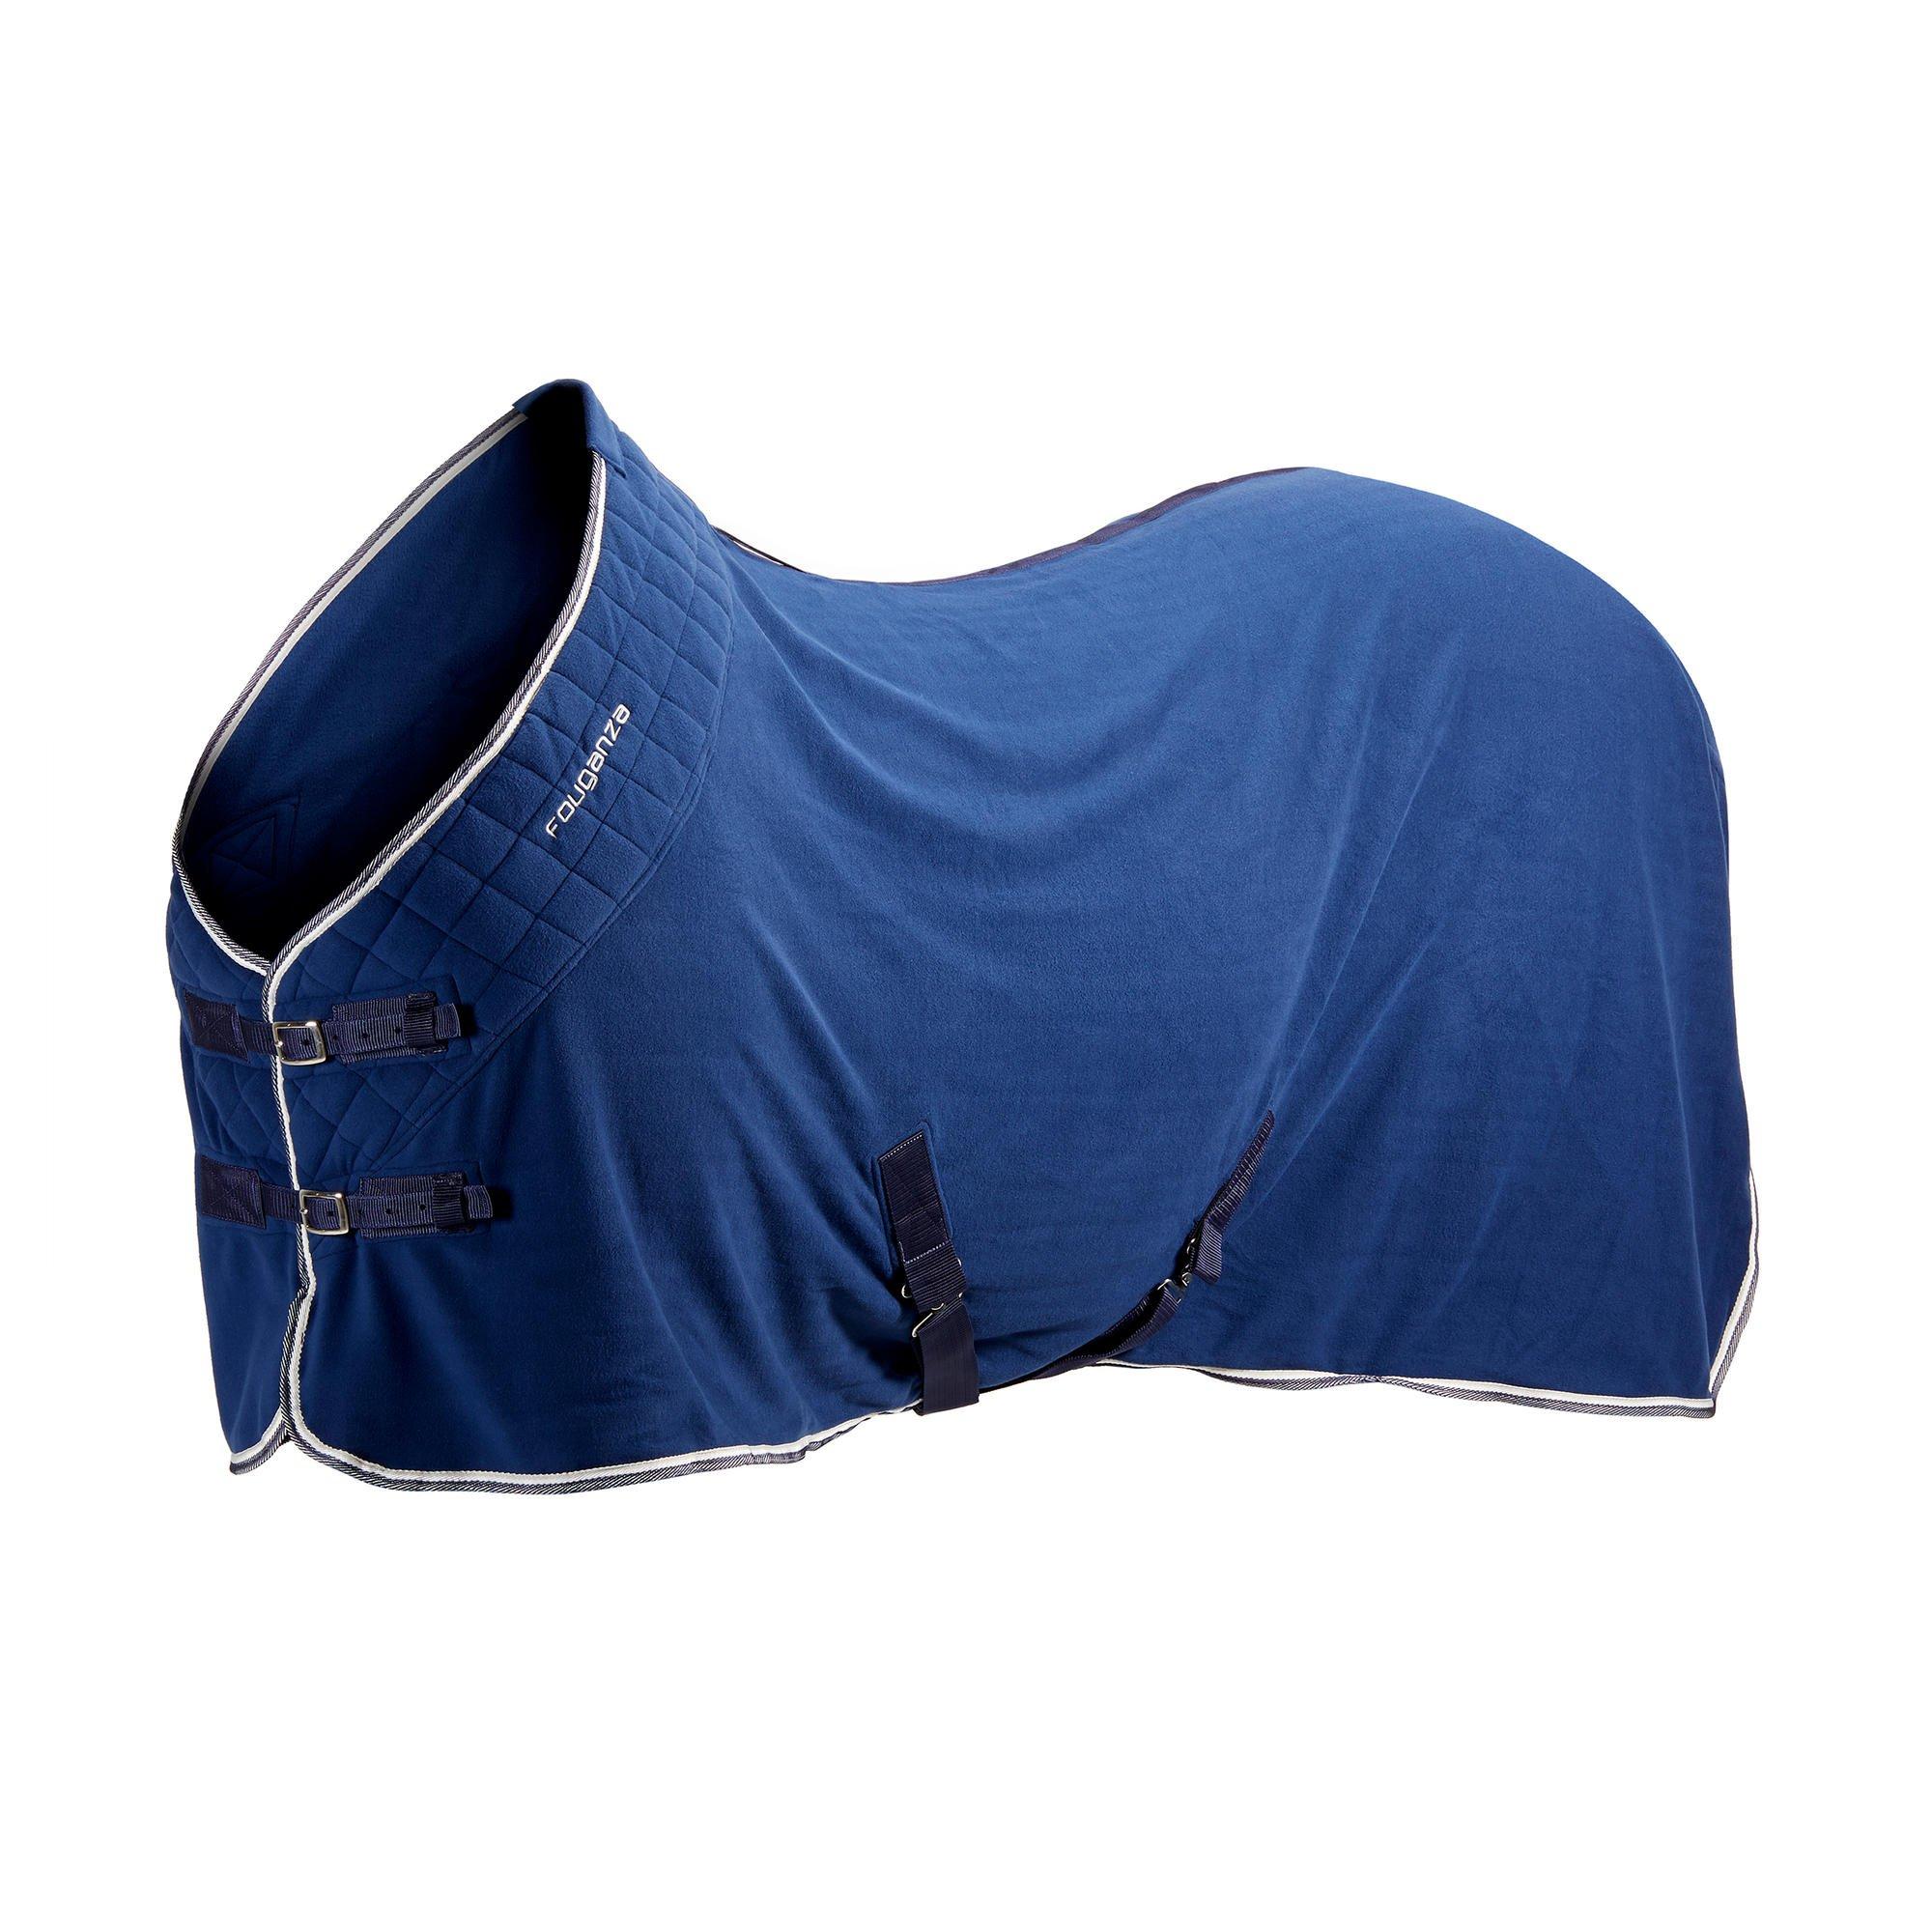 Decathlon Horse Riding Stable Sheet For Horse And Pony Polaire 500